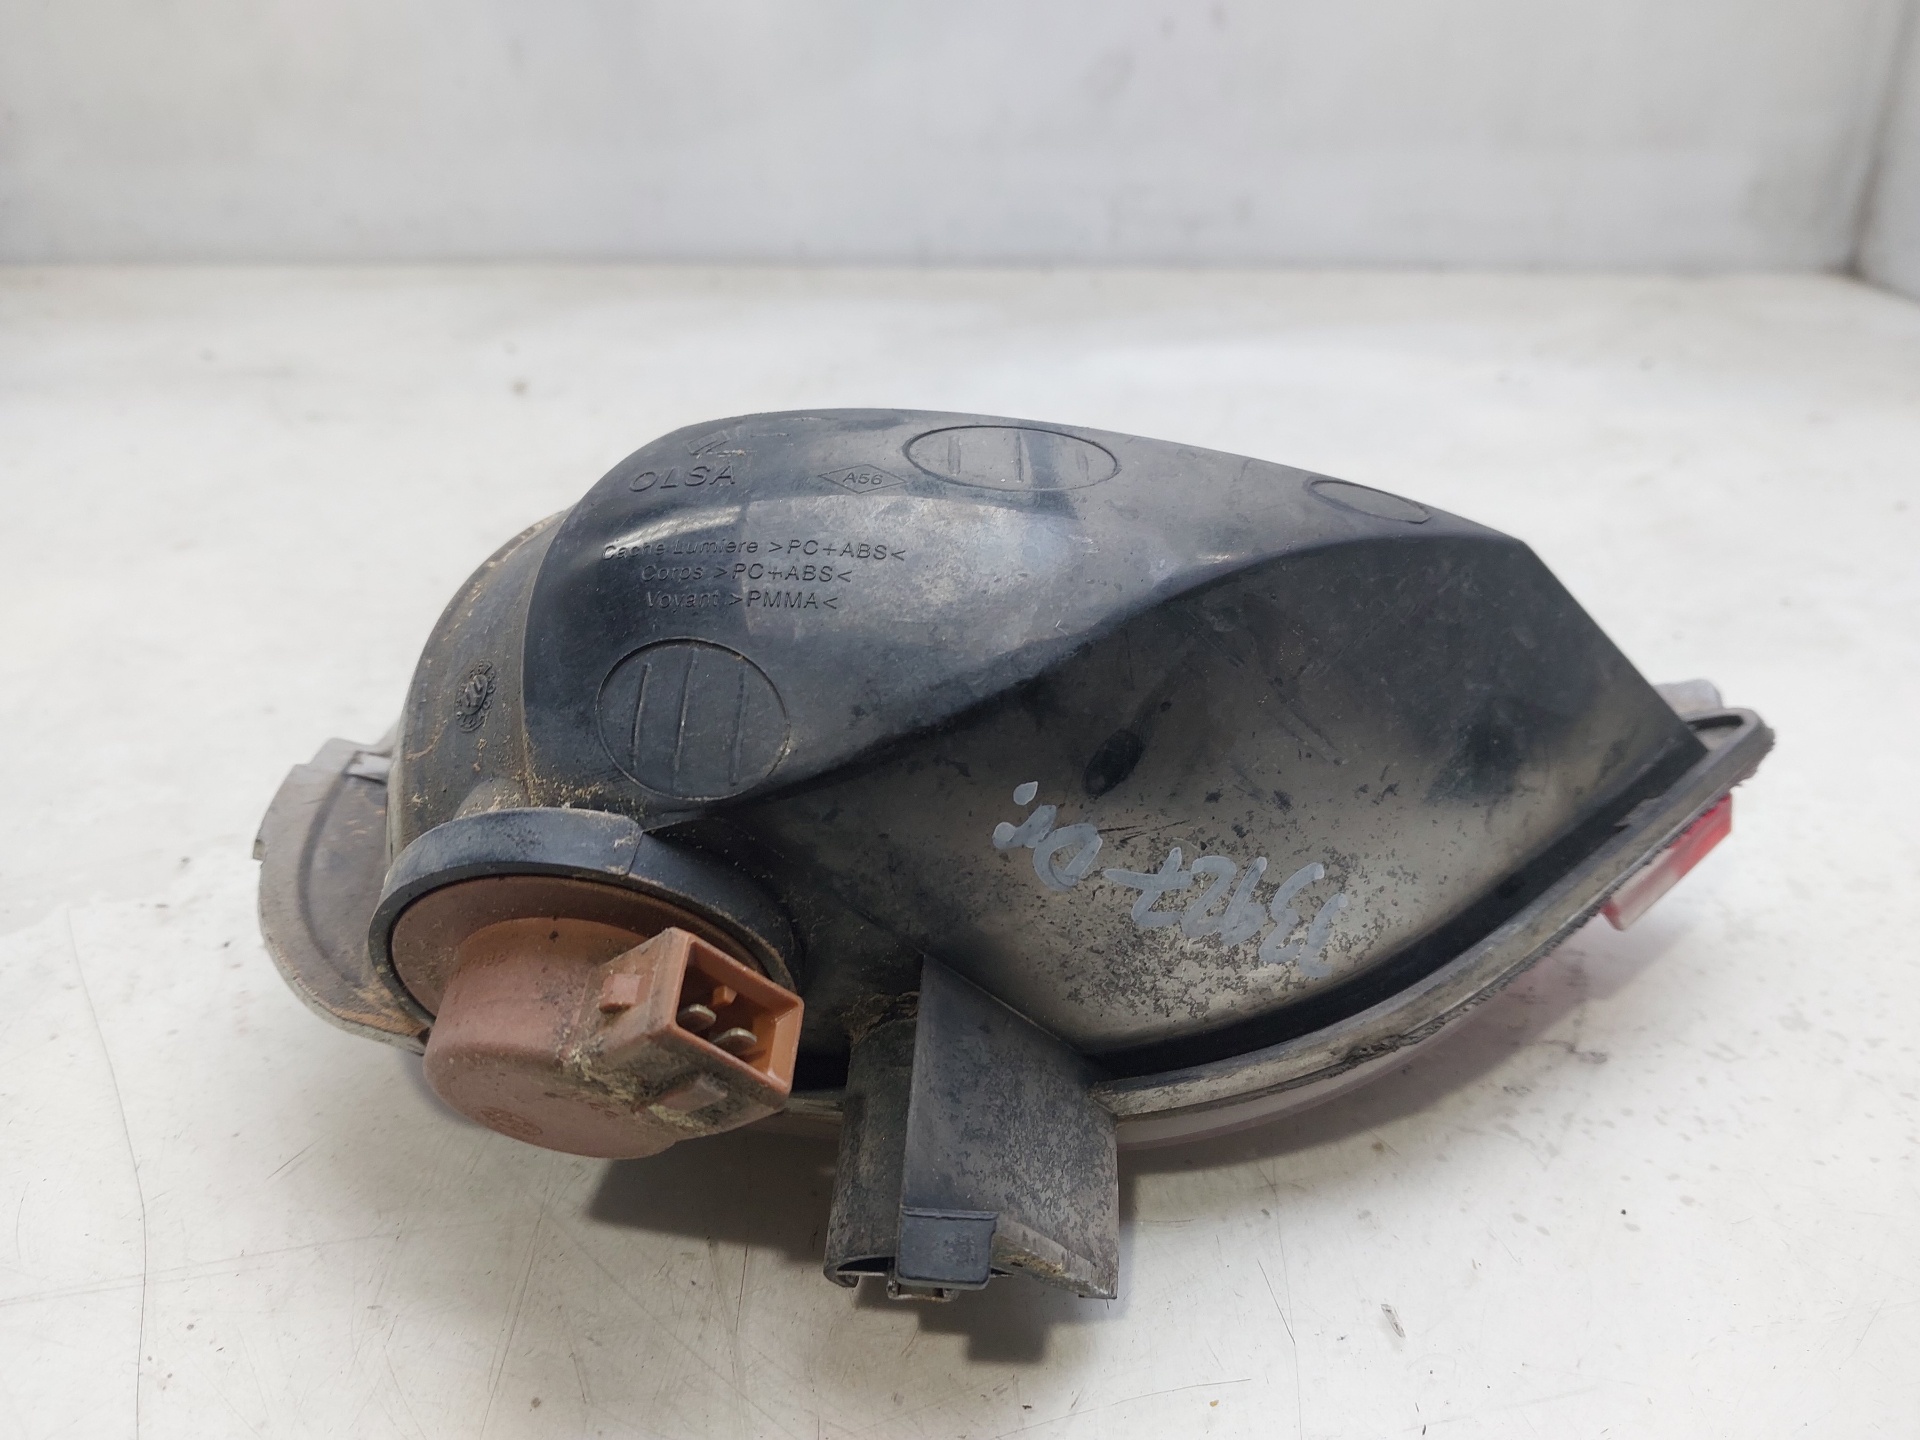 RENAULT Scenic 3 generation (2009-2015) Other parts of the rear bumper 265540003R 24457887